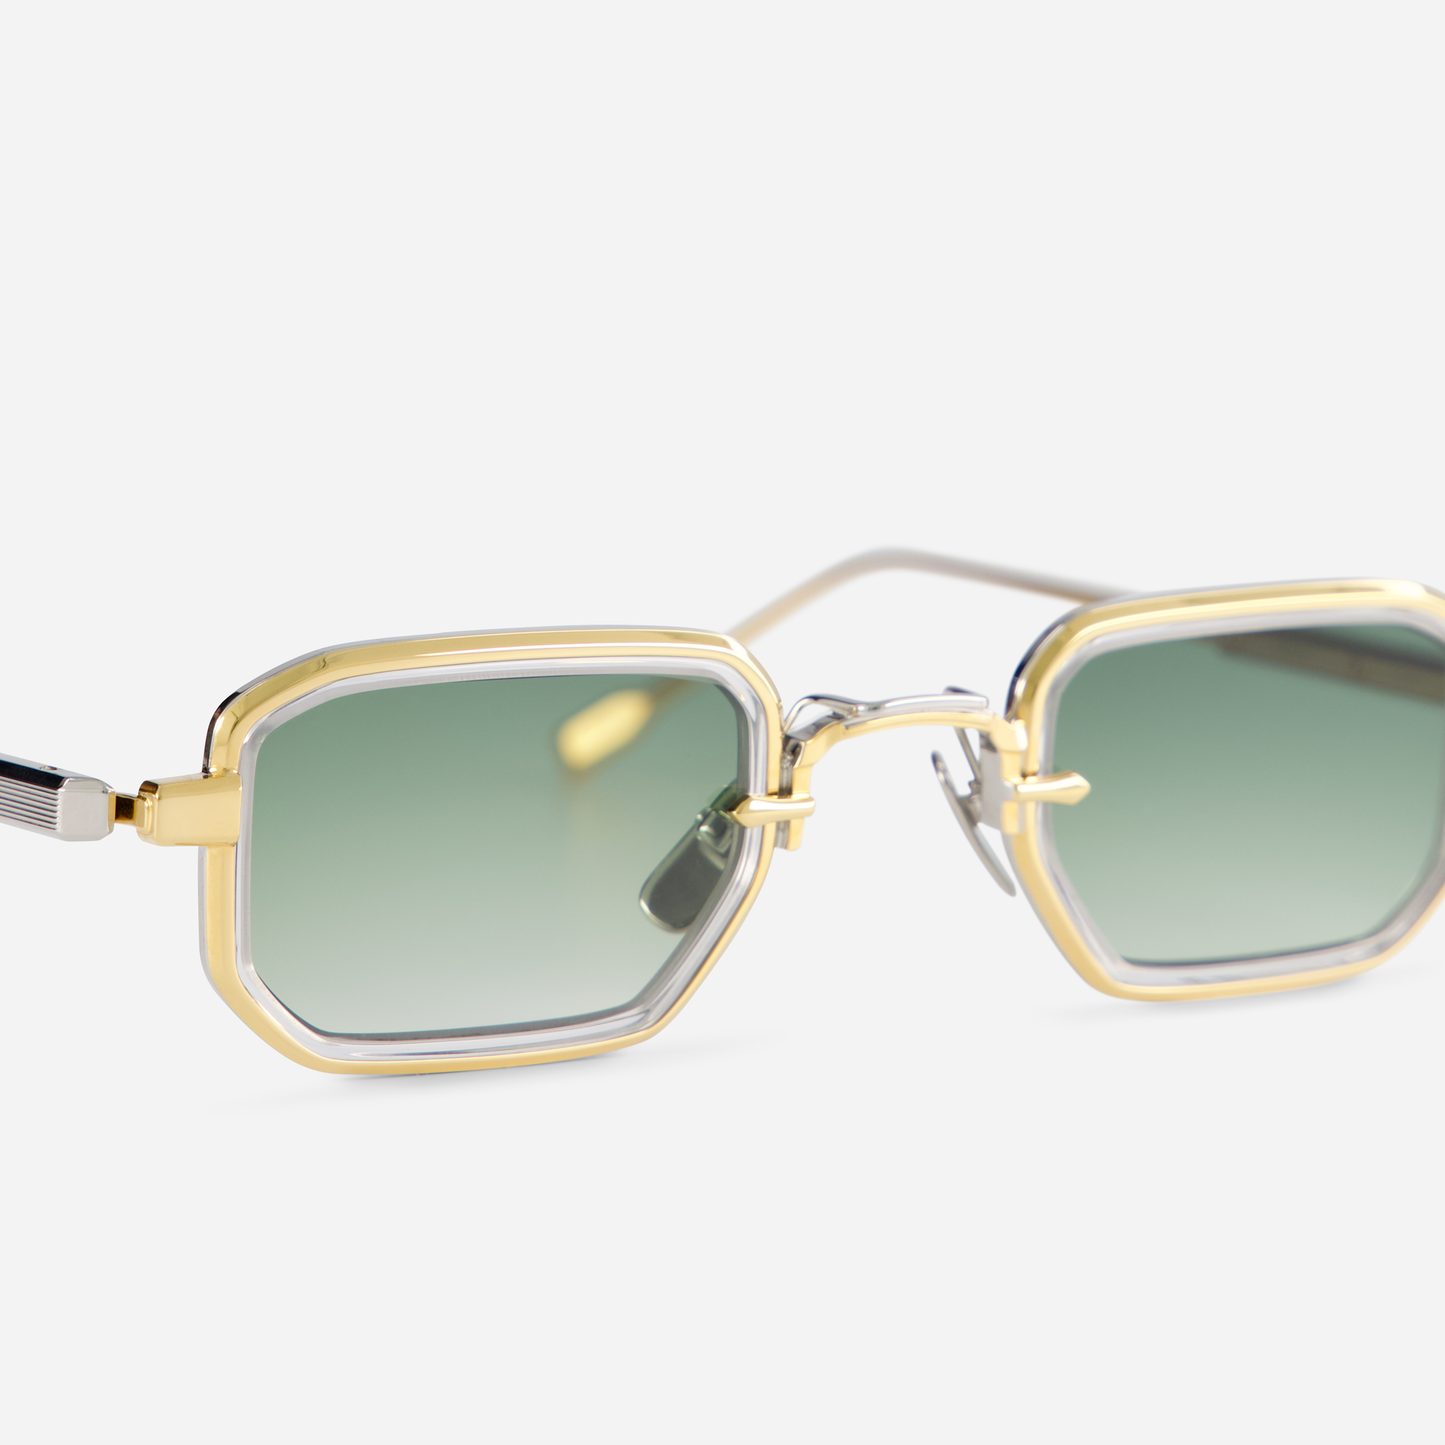 Featuring a titanium frame with yellow gold and platinum coatings, the Deneb-T YG/P-1 eyewear includes a crystal takiron rim insert and gradient green lenses.